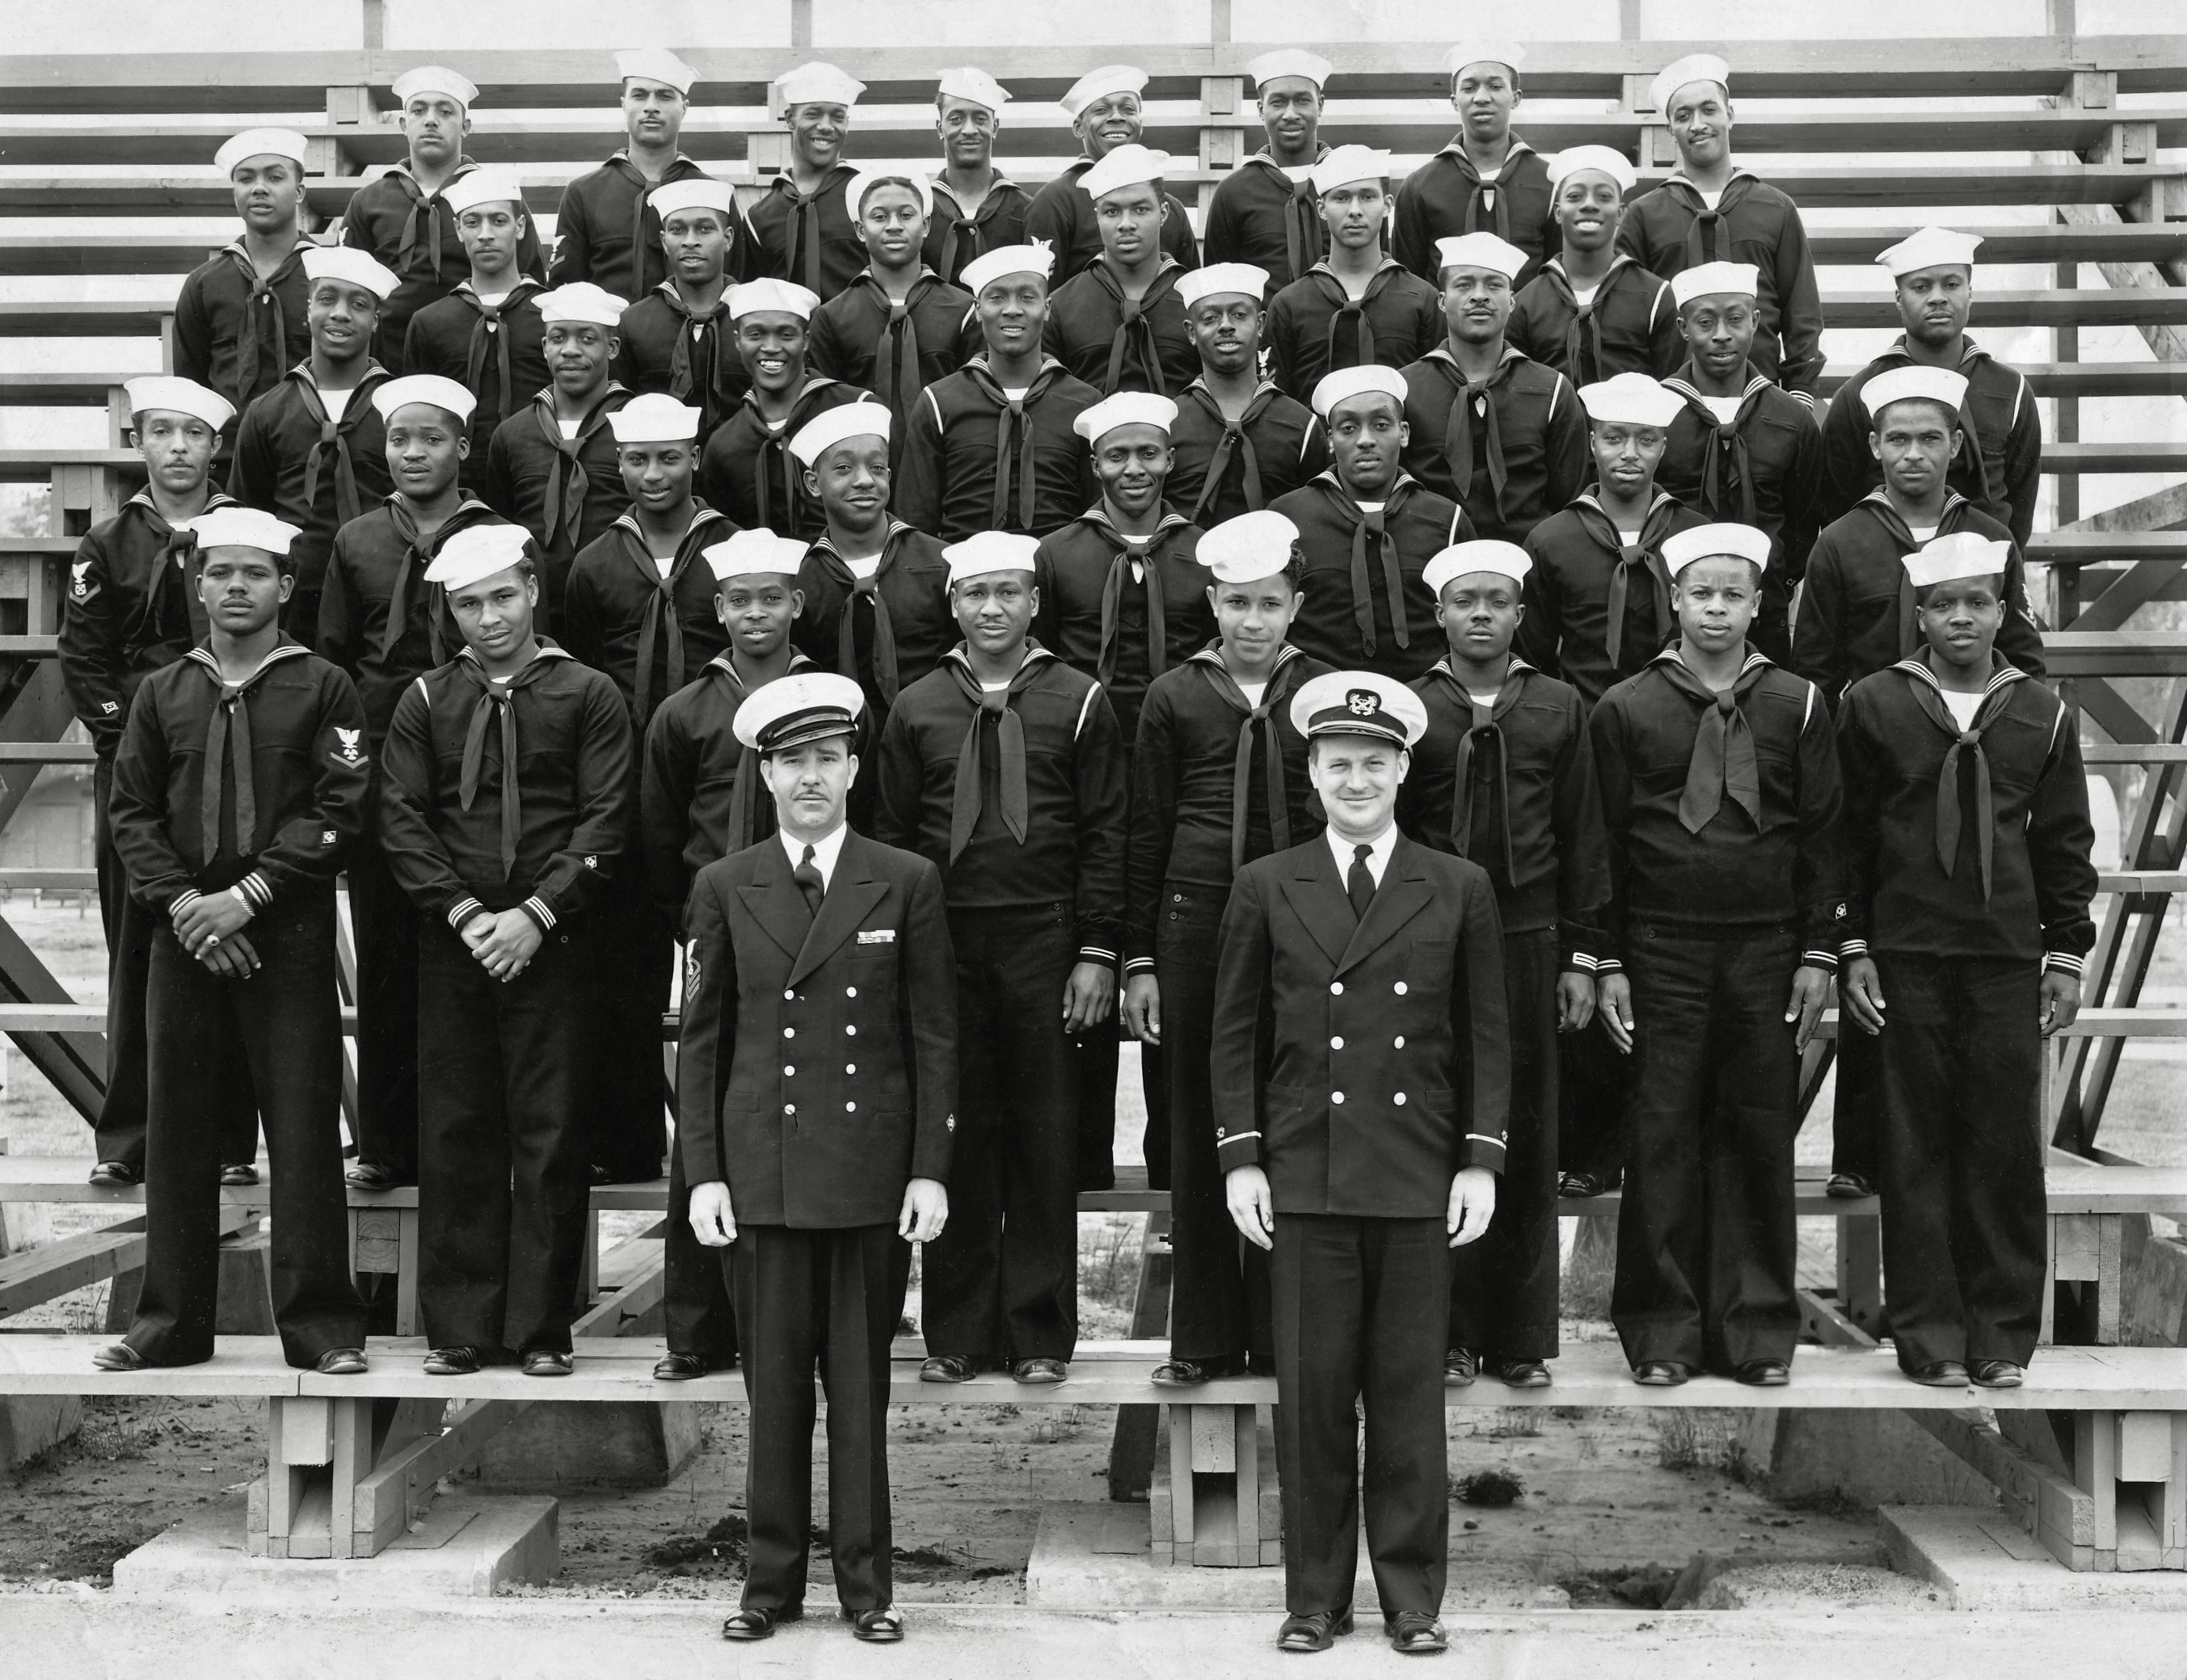 My grandfather Thomas A. Hawkins and his Navy peers in their enlistment group photo, about 1943. He enlisted in the Construction Battalion and was separated in 1953 as a Boatswain's Mate (Stevedore) Petty Officer First Class. This photo was taken either in Columbia or Charleston, S.C., where he entered). My grandfather is the second person directly above the head of the officer on the right. View full size.